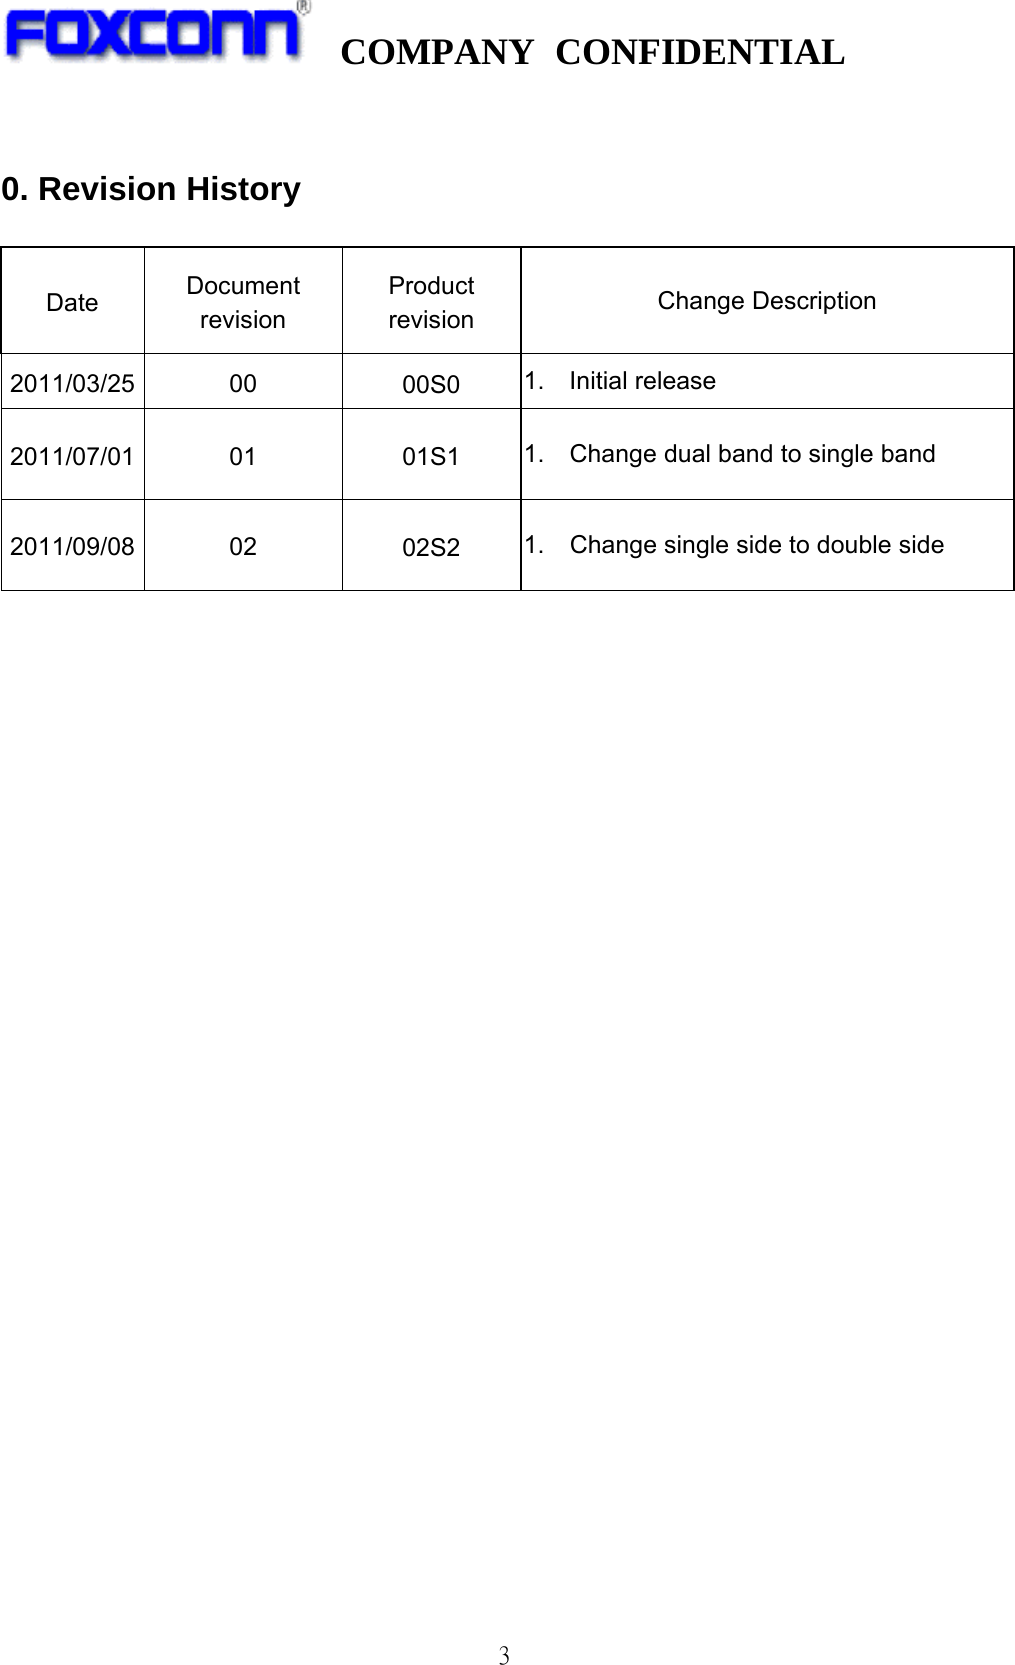  COMPANY CONFIDENTIAL   3  0. Revision History  Date  Document revision Product revision  Change Description 2011/03/25 00  00S0  1. Initial release  2011/07/01 01  01S1  1.    Change dual band to single band 2011/09/08 02  02S2  1.    Change single side to double side  